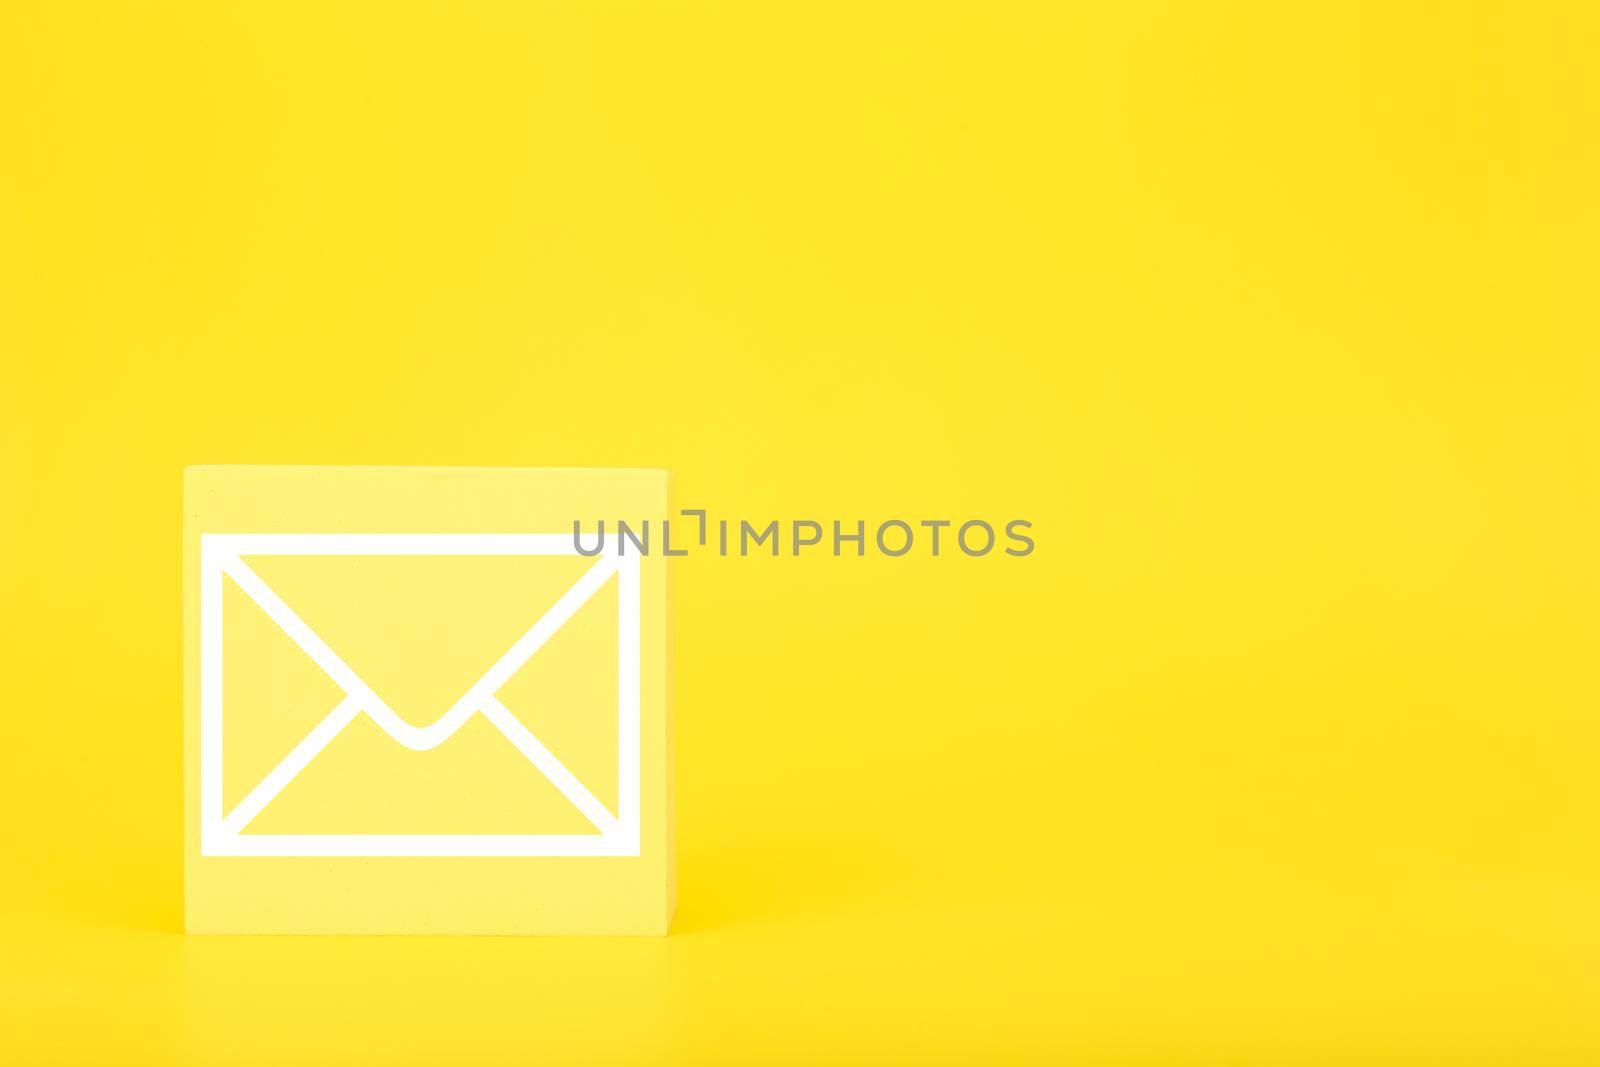 Email marketing, newsletter, promotion information and virtual communication concept. Envelope drawn on small toy cube against bright yellow background with copy space. 